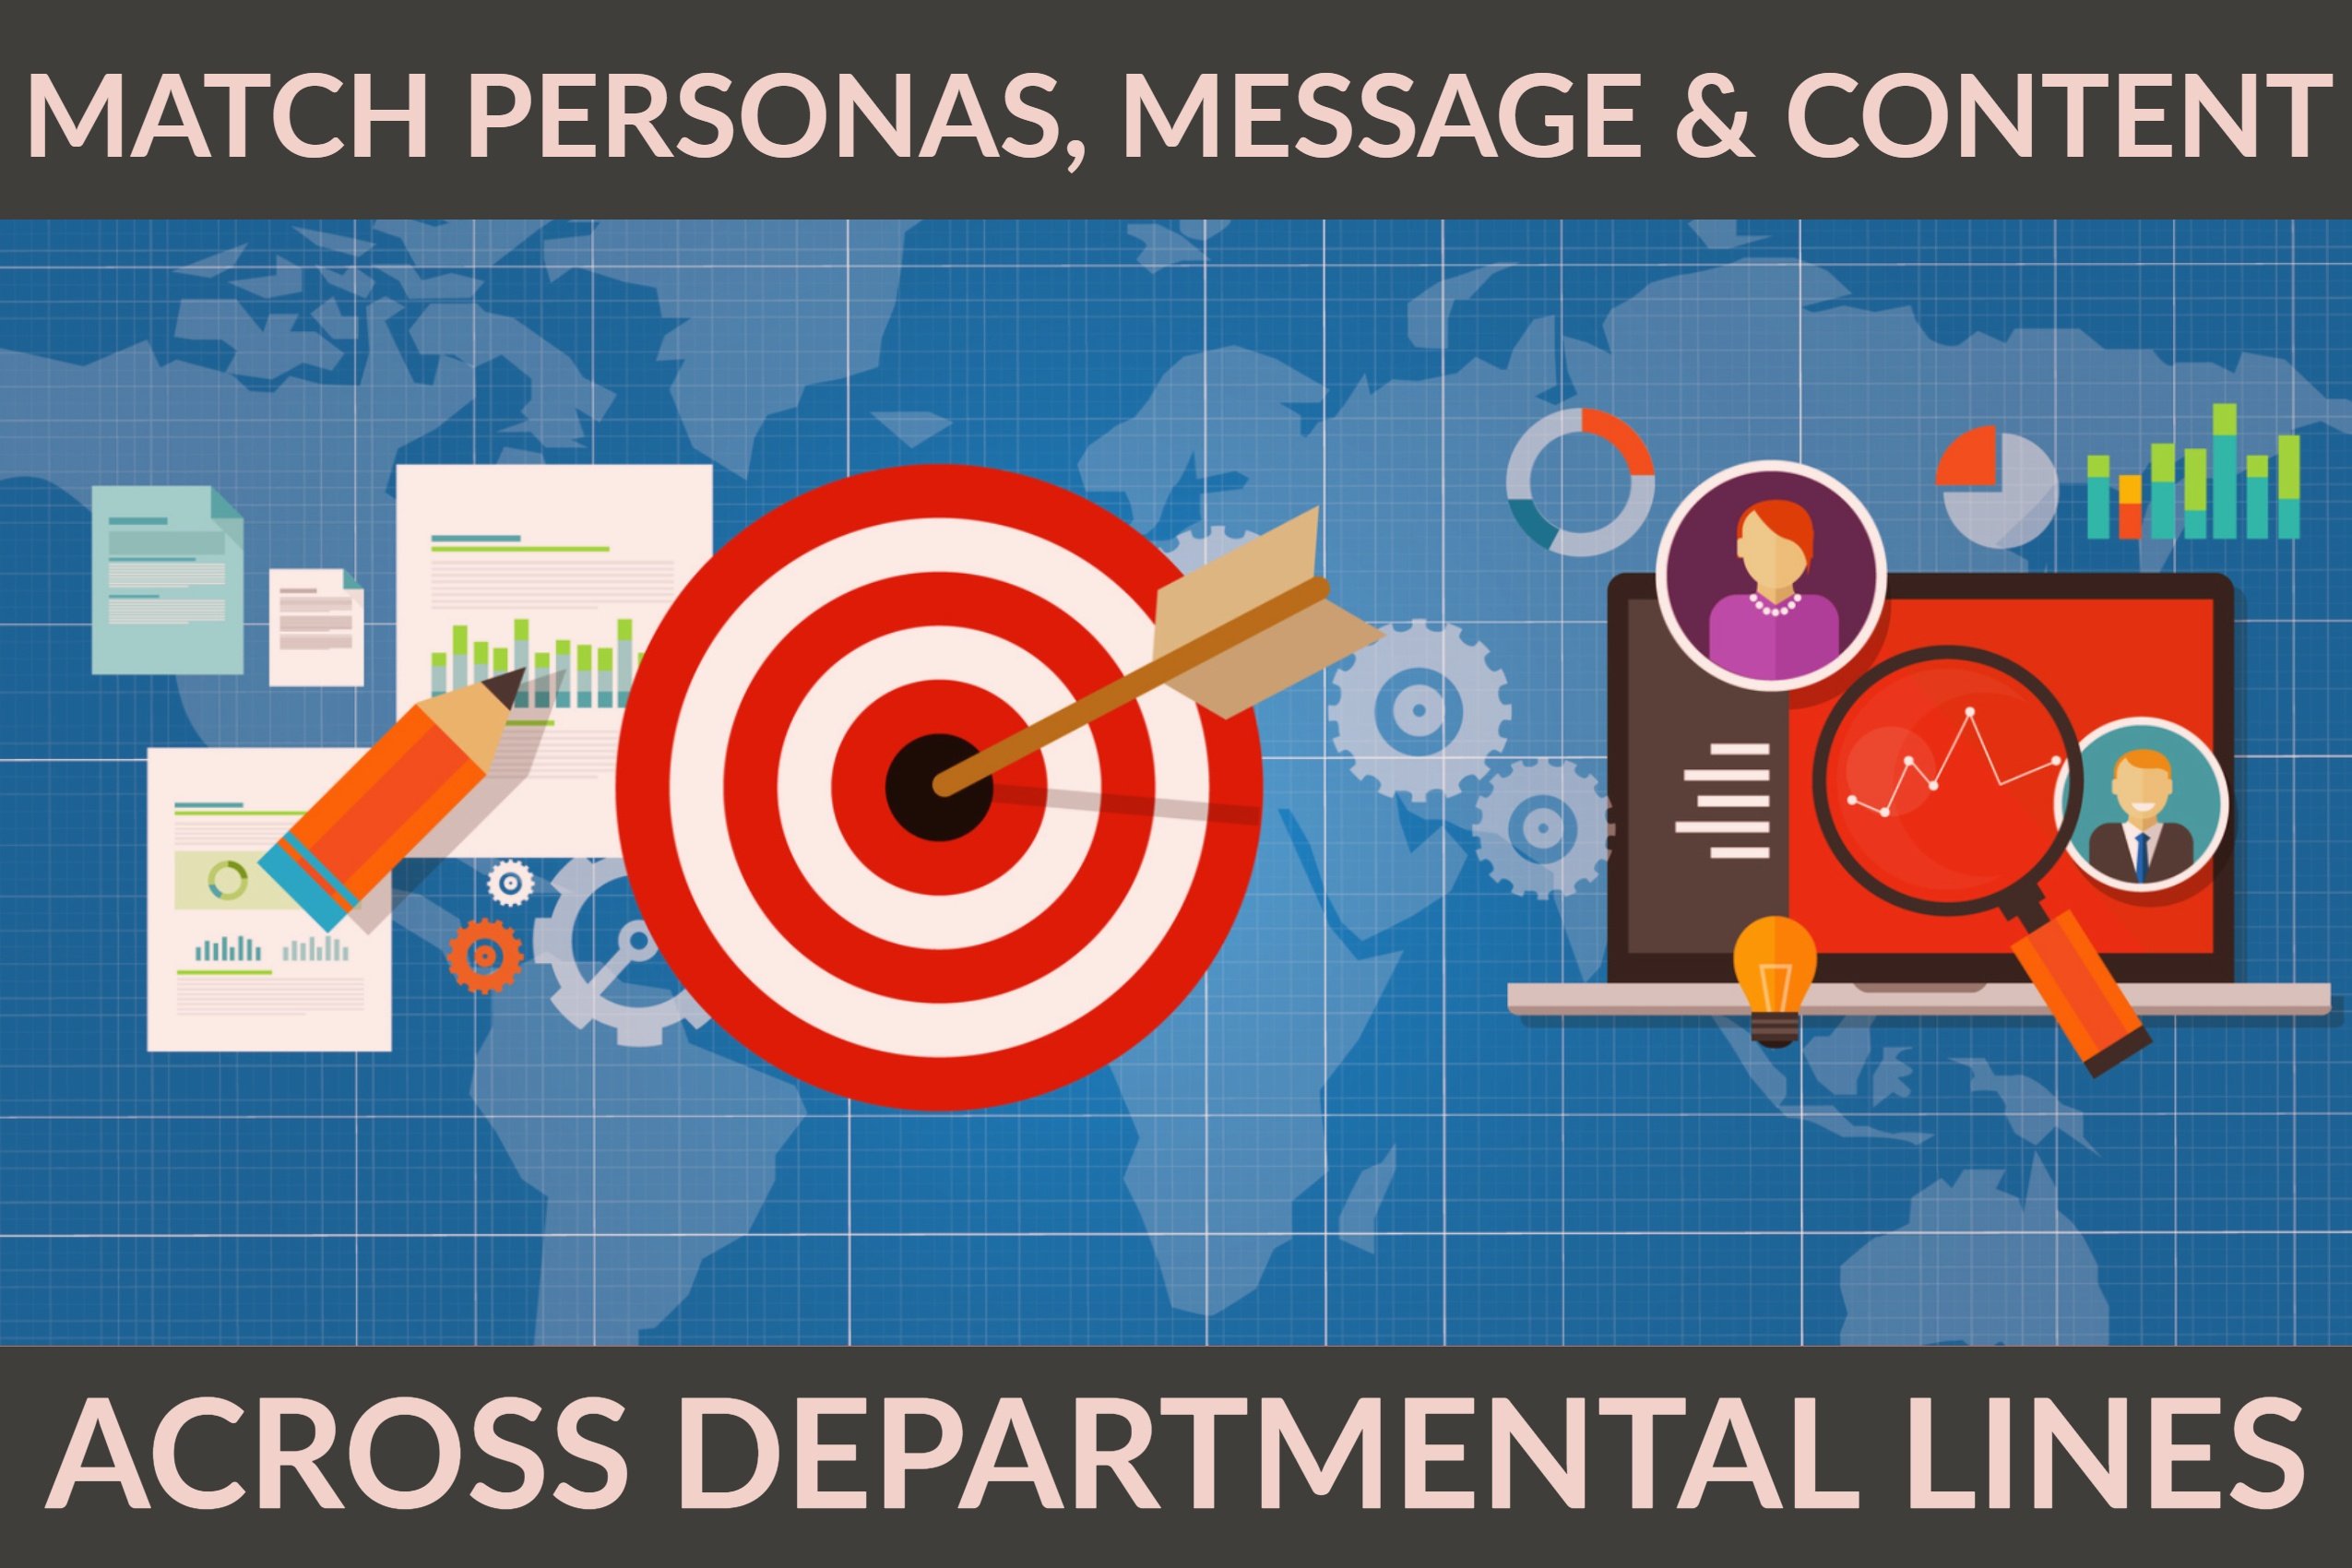 Match Personas, Message & Content Across Departmental Lines